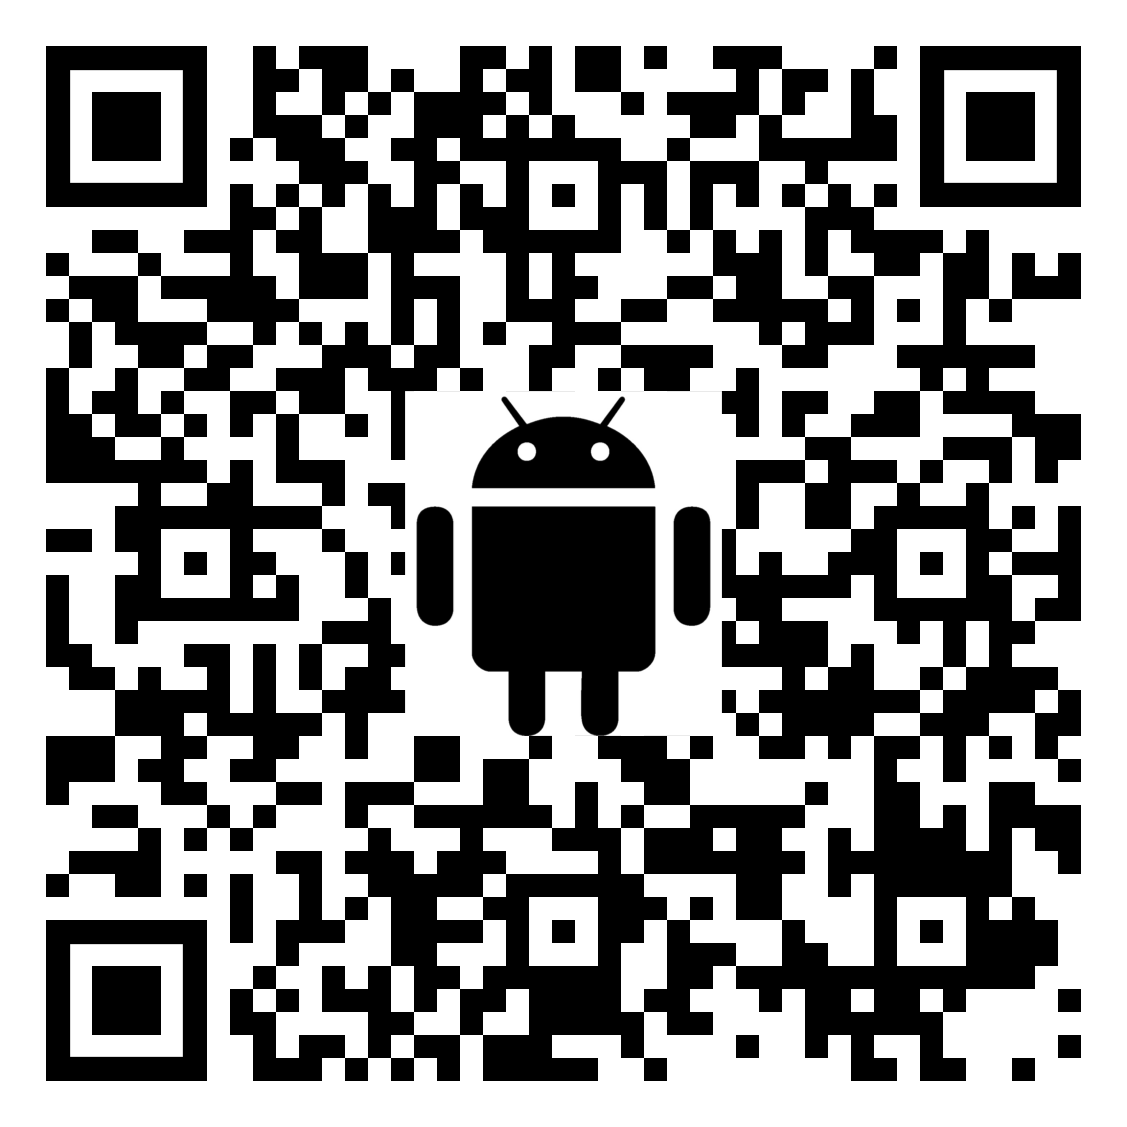 QR code for SKYE View 3 app on Google Play